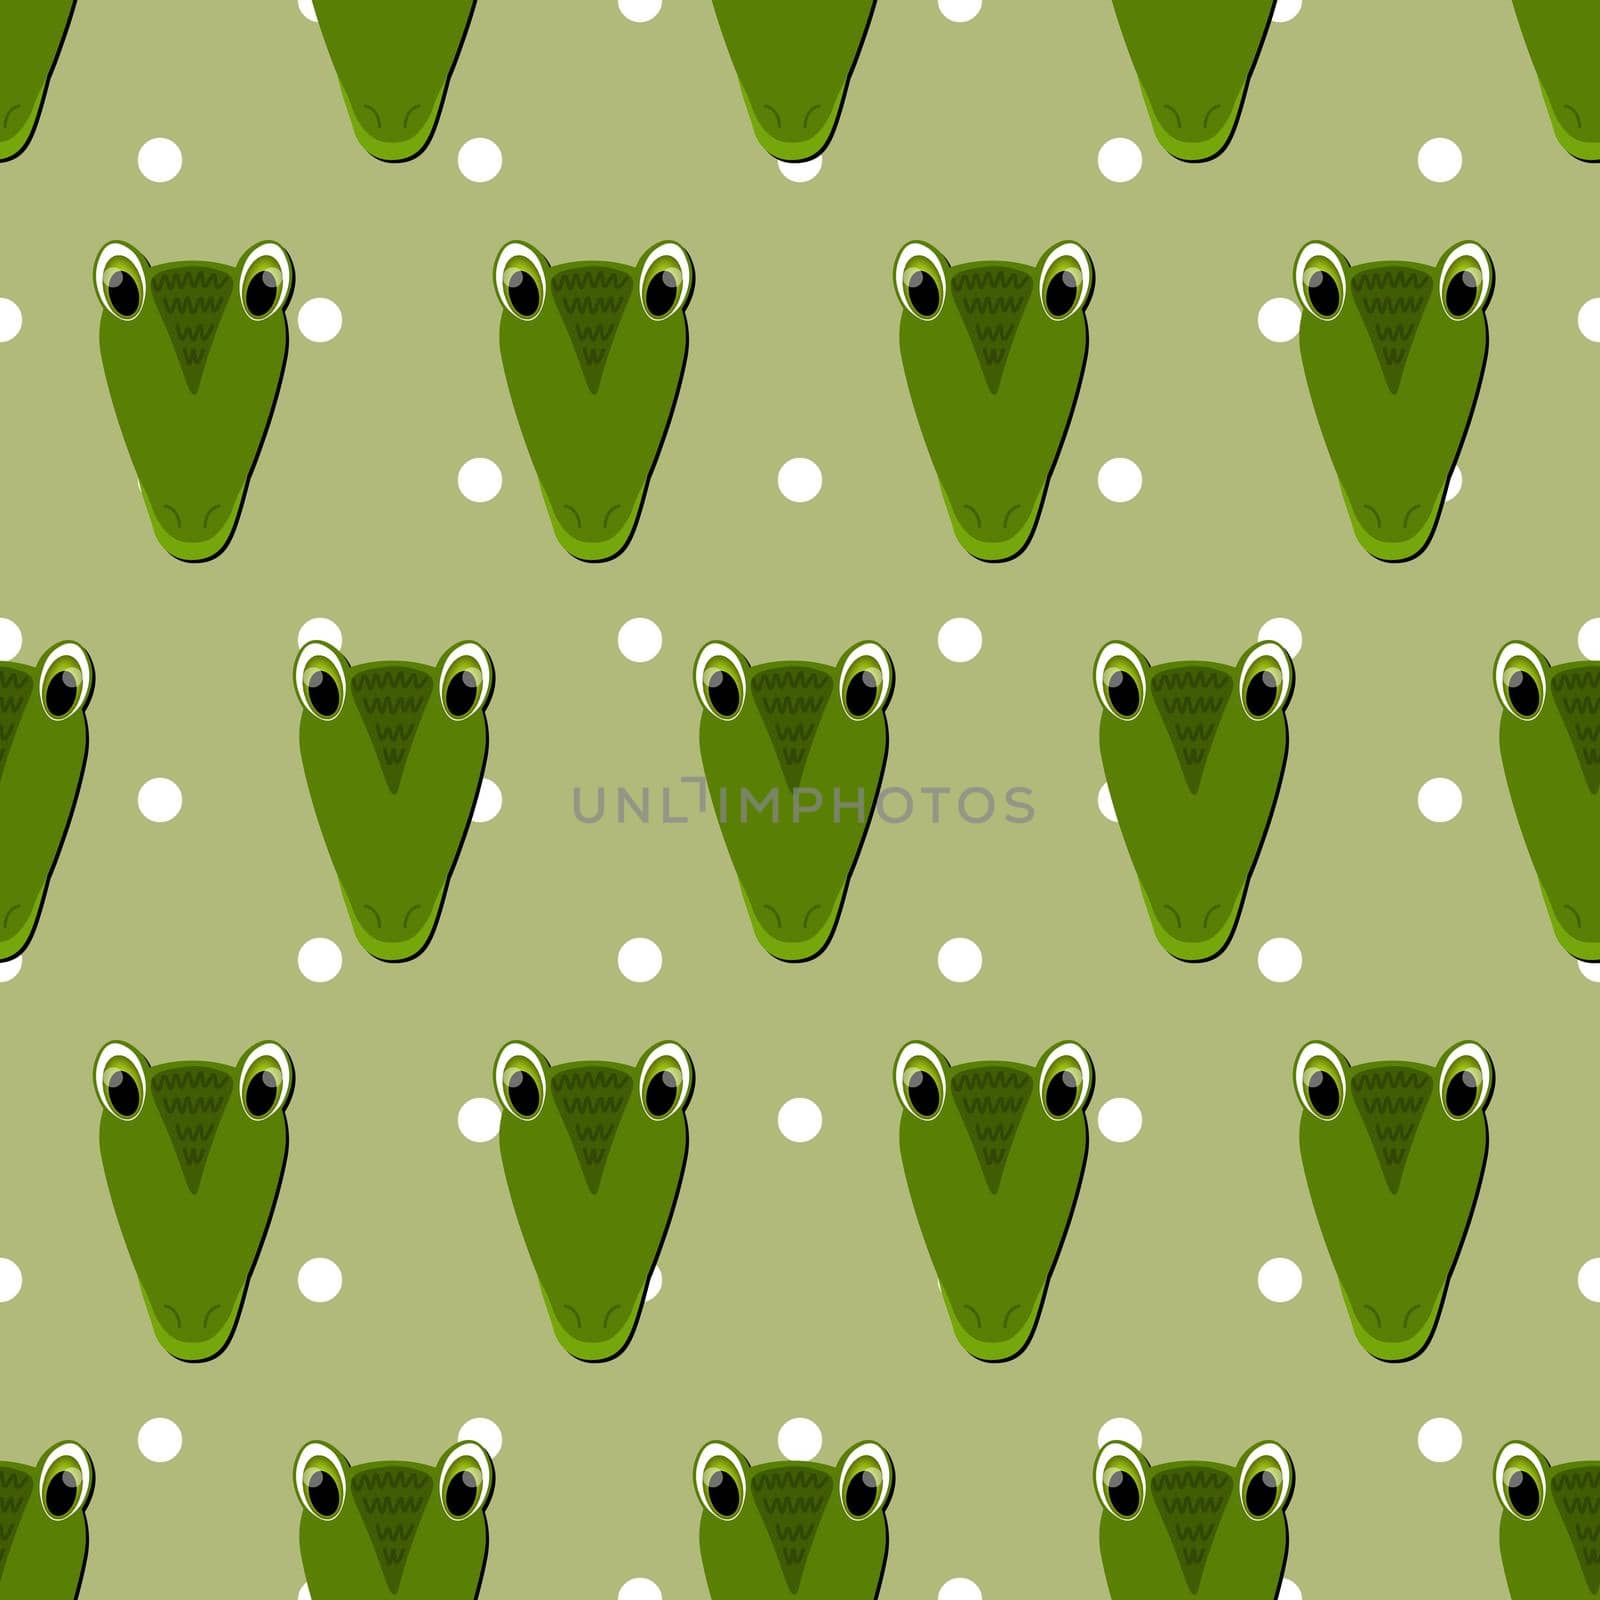 Vector flat animals colorful illustration for kids. Seamless pattern with cute crocodile face on green polka dots background. Adorable cartoon character. Design for card, poster, fabric, textile. by allaku